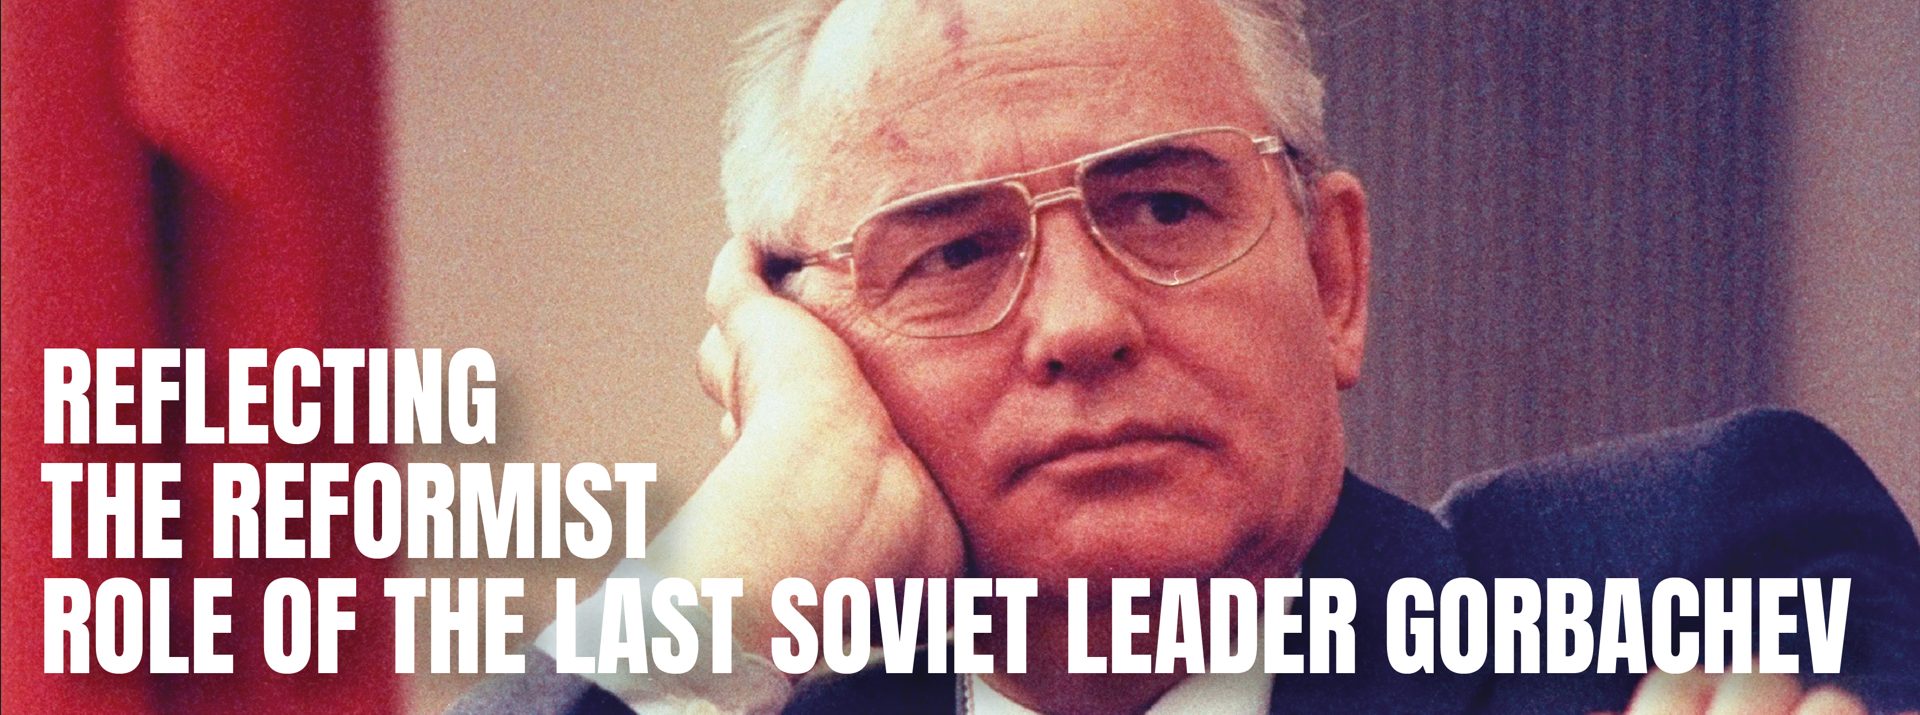 Read more about the article Reflecting the Reformistrole of the last soviet leader Gorbachev